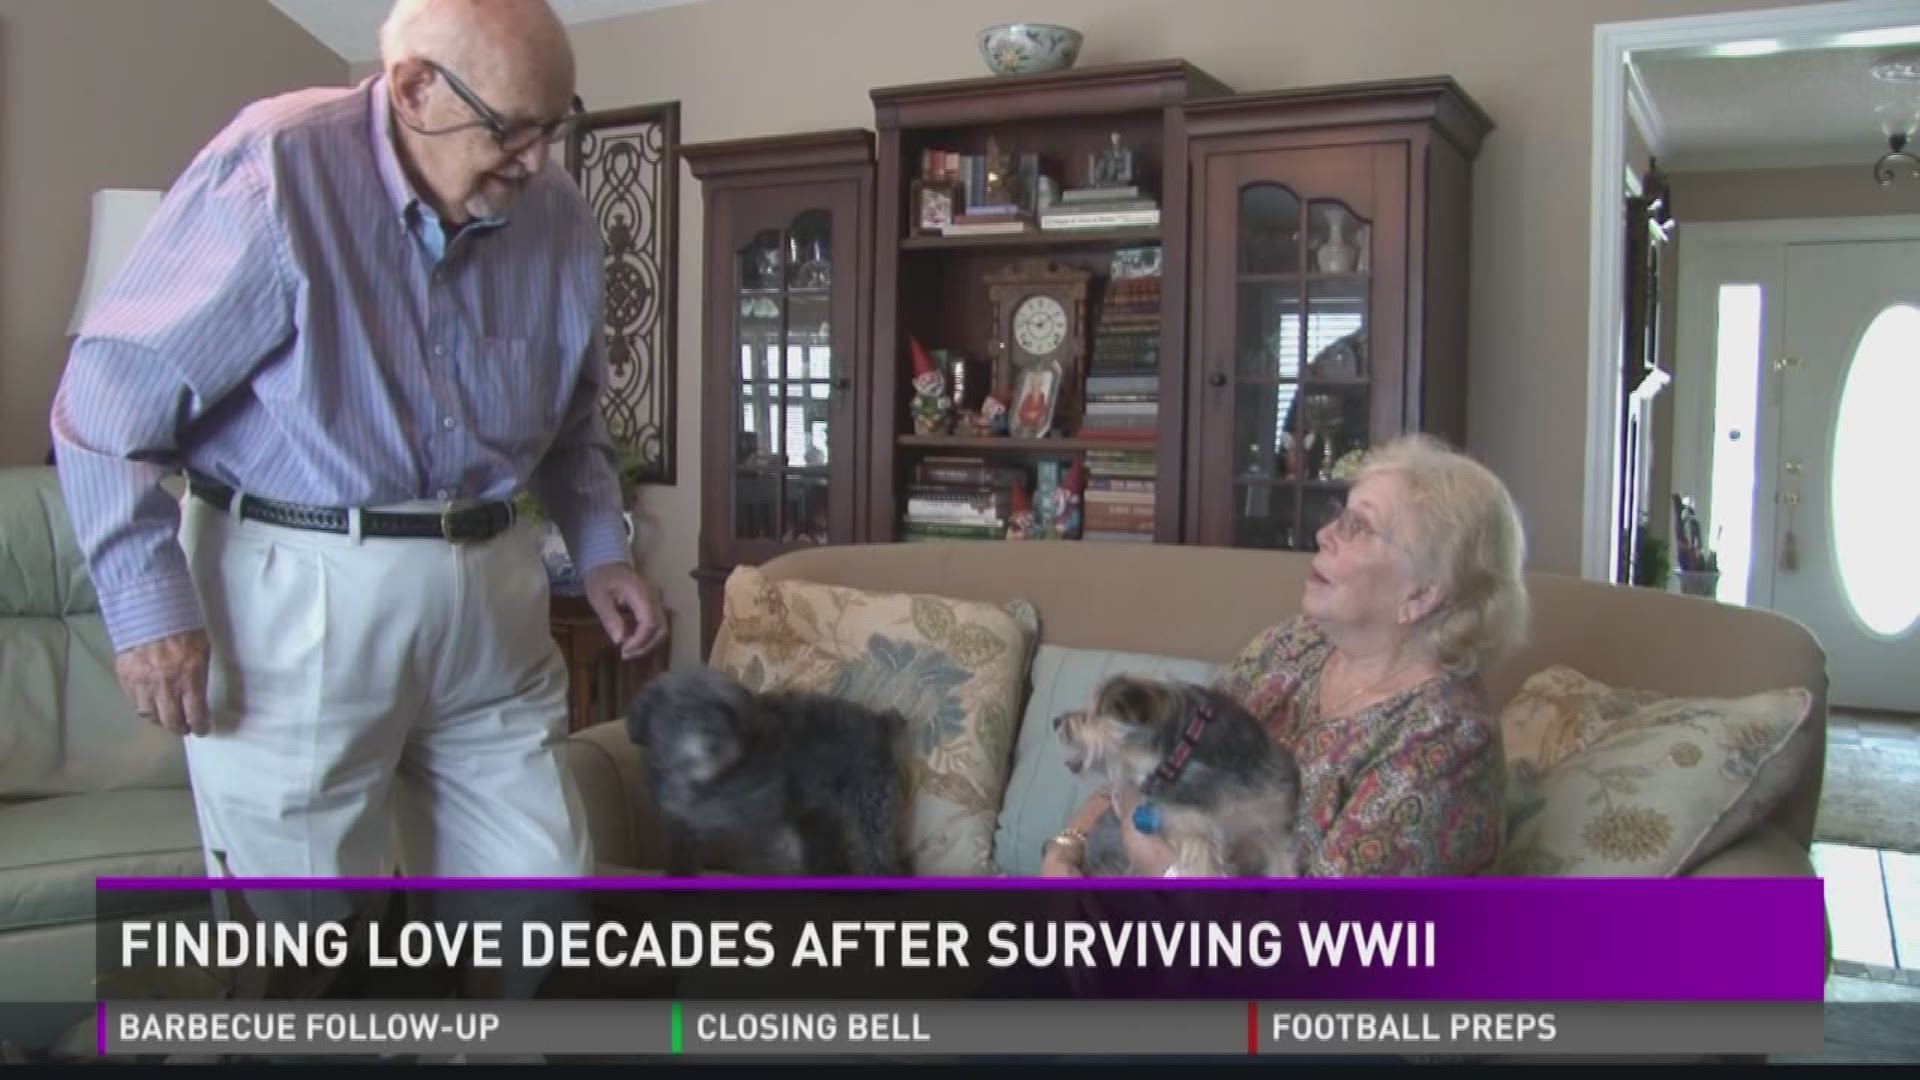 Finding love decades after surviving WWII